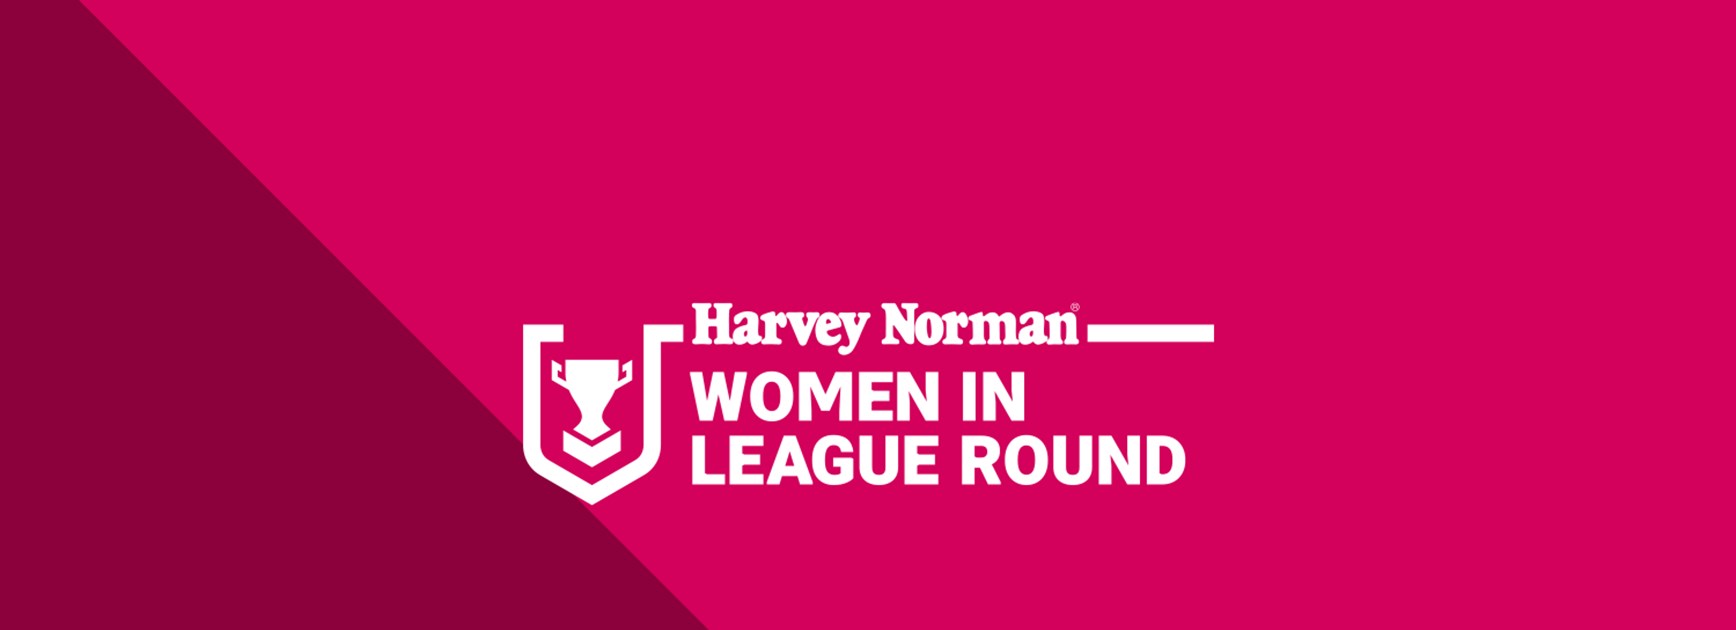 Hostplus Cup Round 18 Women in League team lists